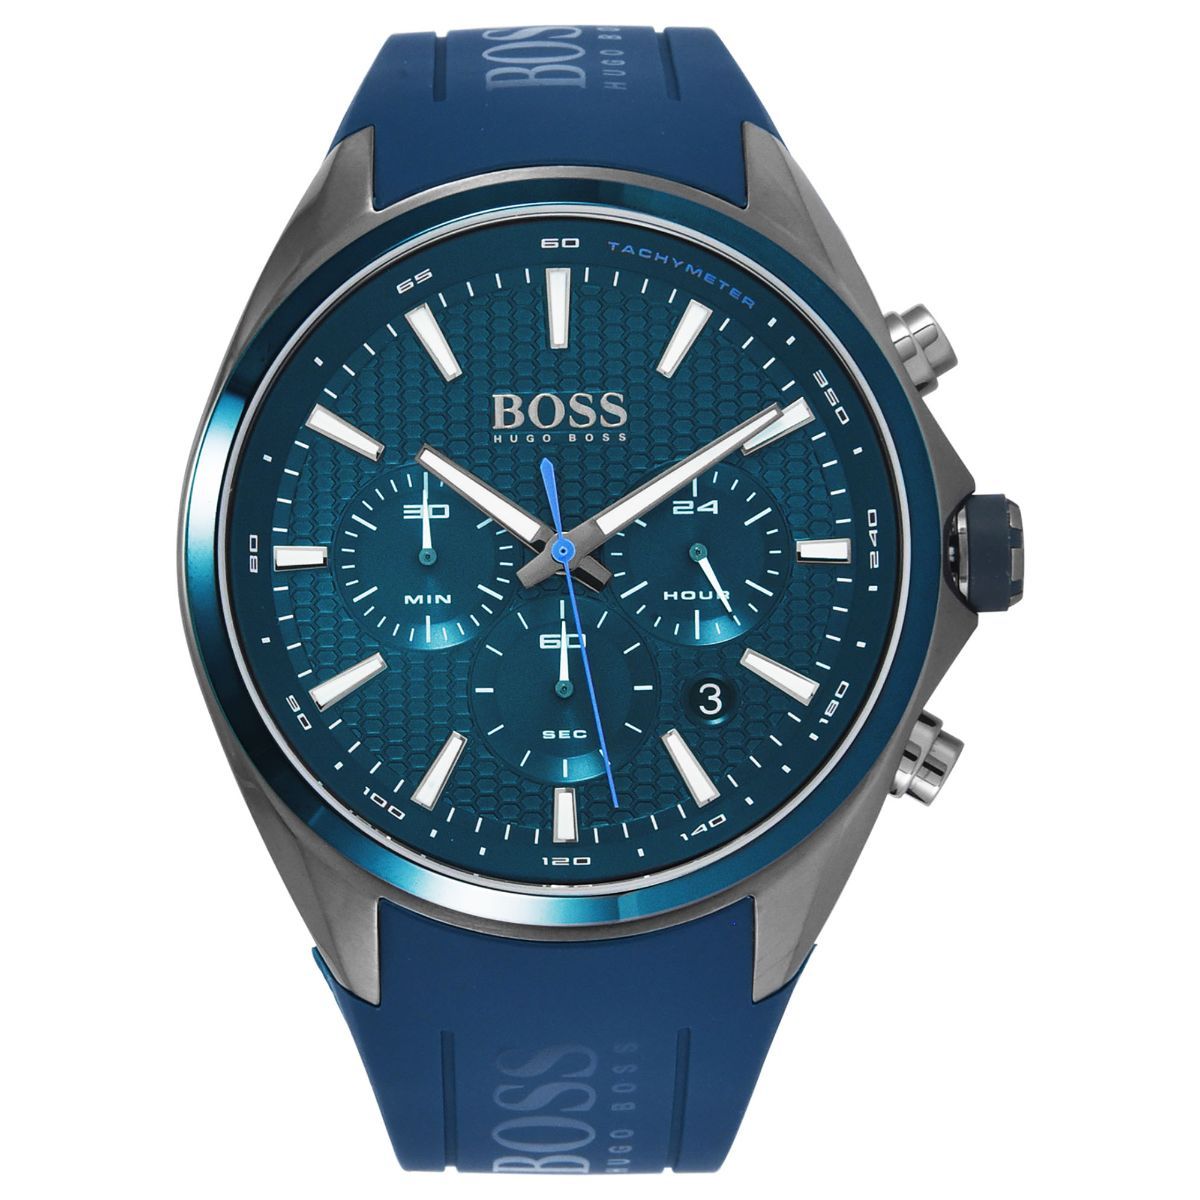 Hugo Boss Watches Sport Analog Blue Dial Color Men Watch- 1513856: Buy ...